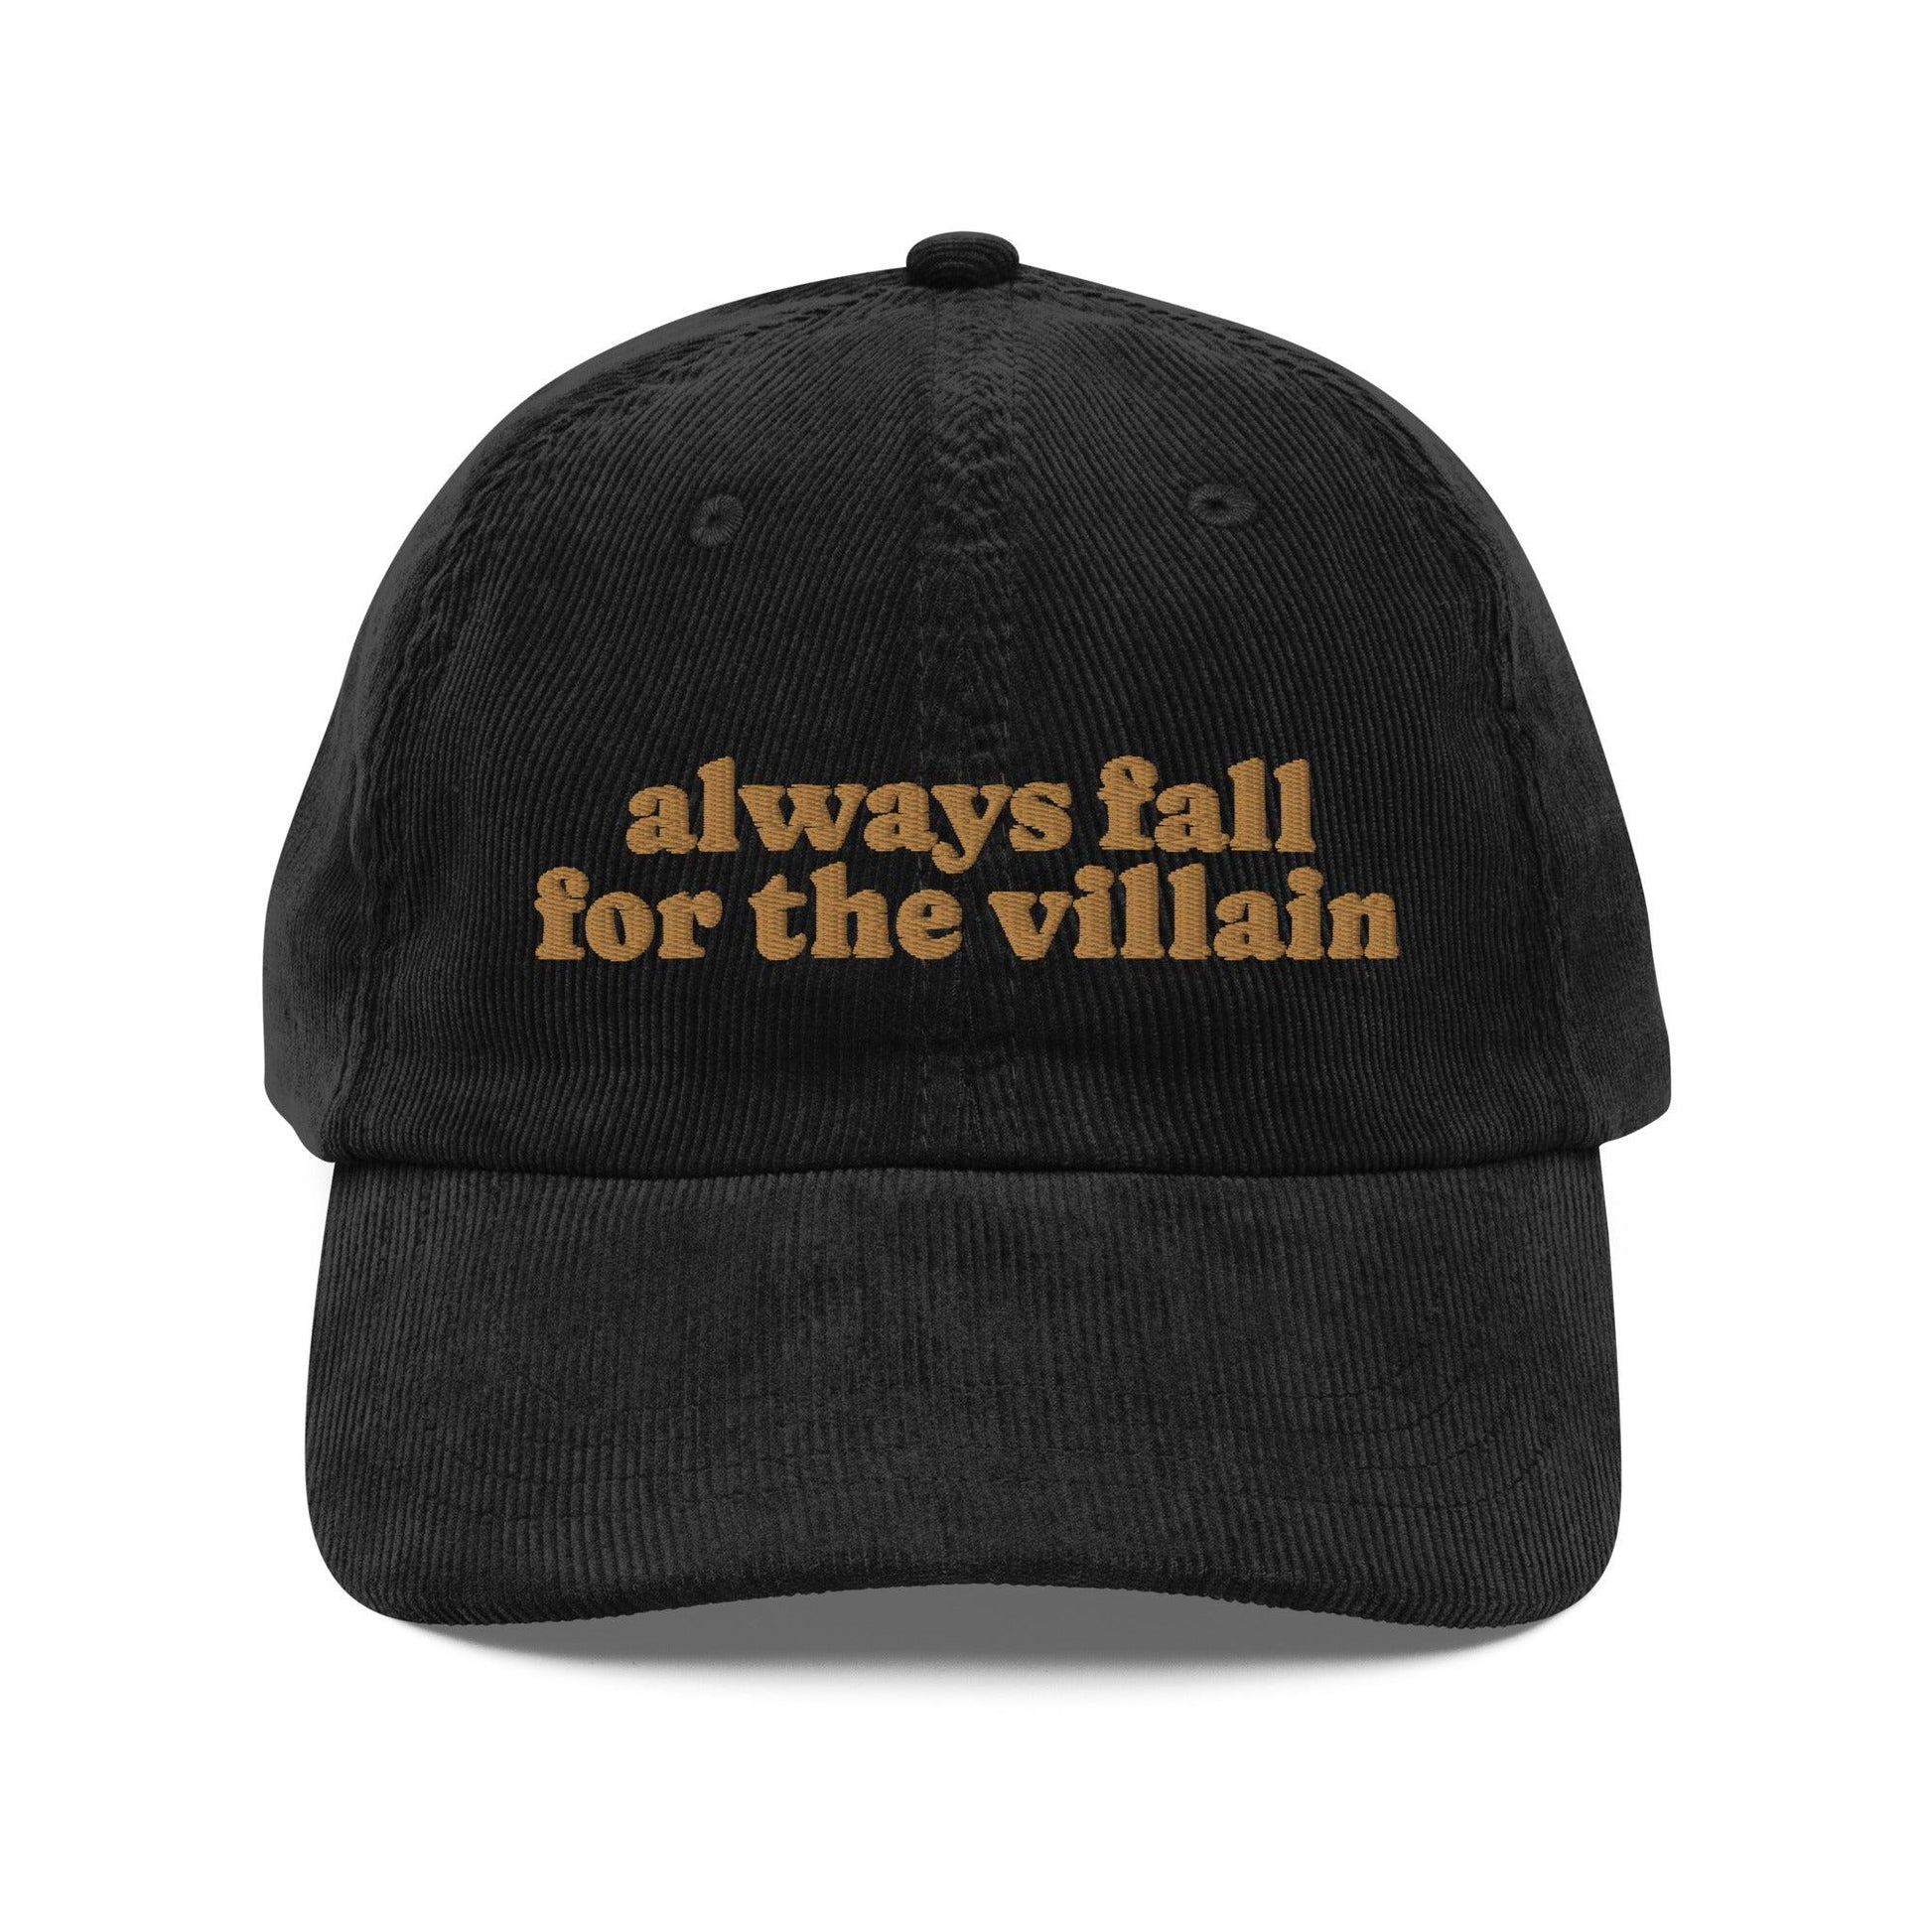 Always Fall For The Villain Vintage corduroy cap - The Bean Workshop - book lover, bookish, cap, corduroy cap, embroidered, hat, old school, vintage